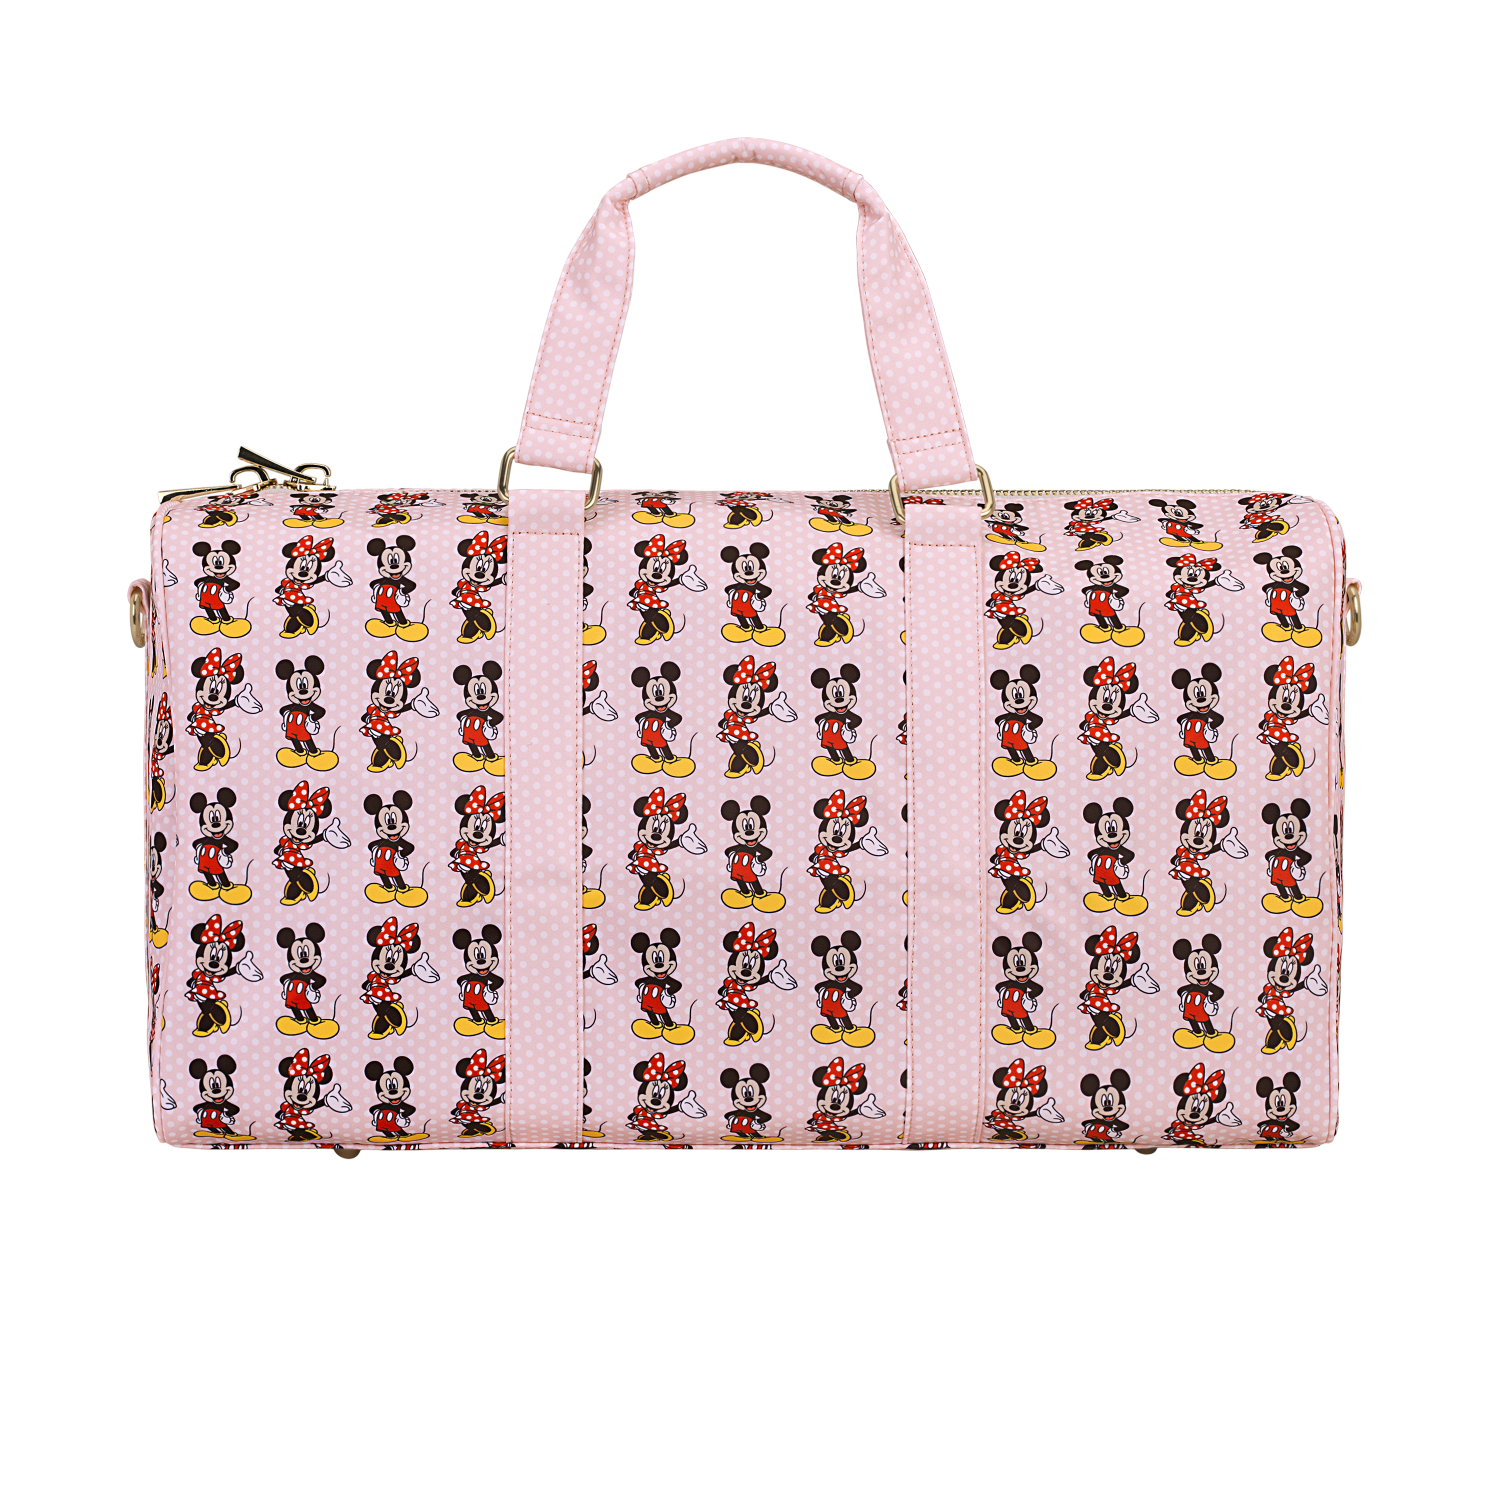 Mickey & Minnie Mouse Duffle Bag